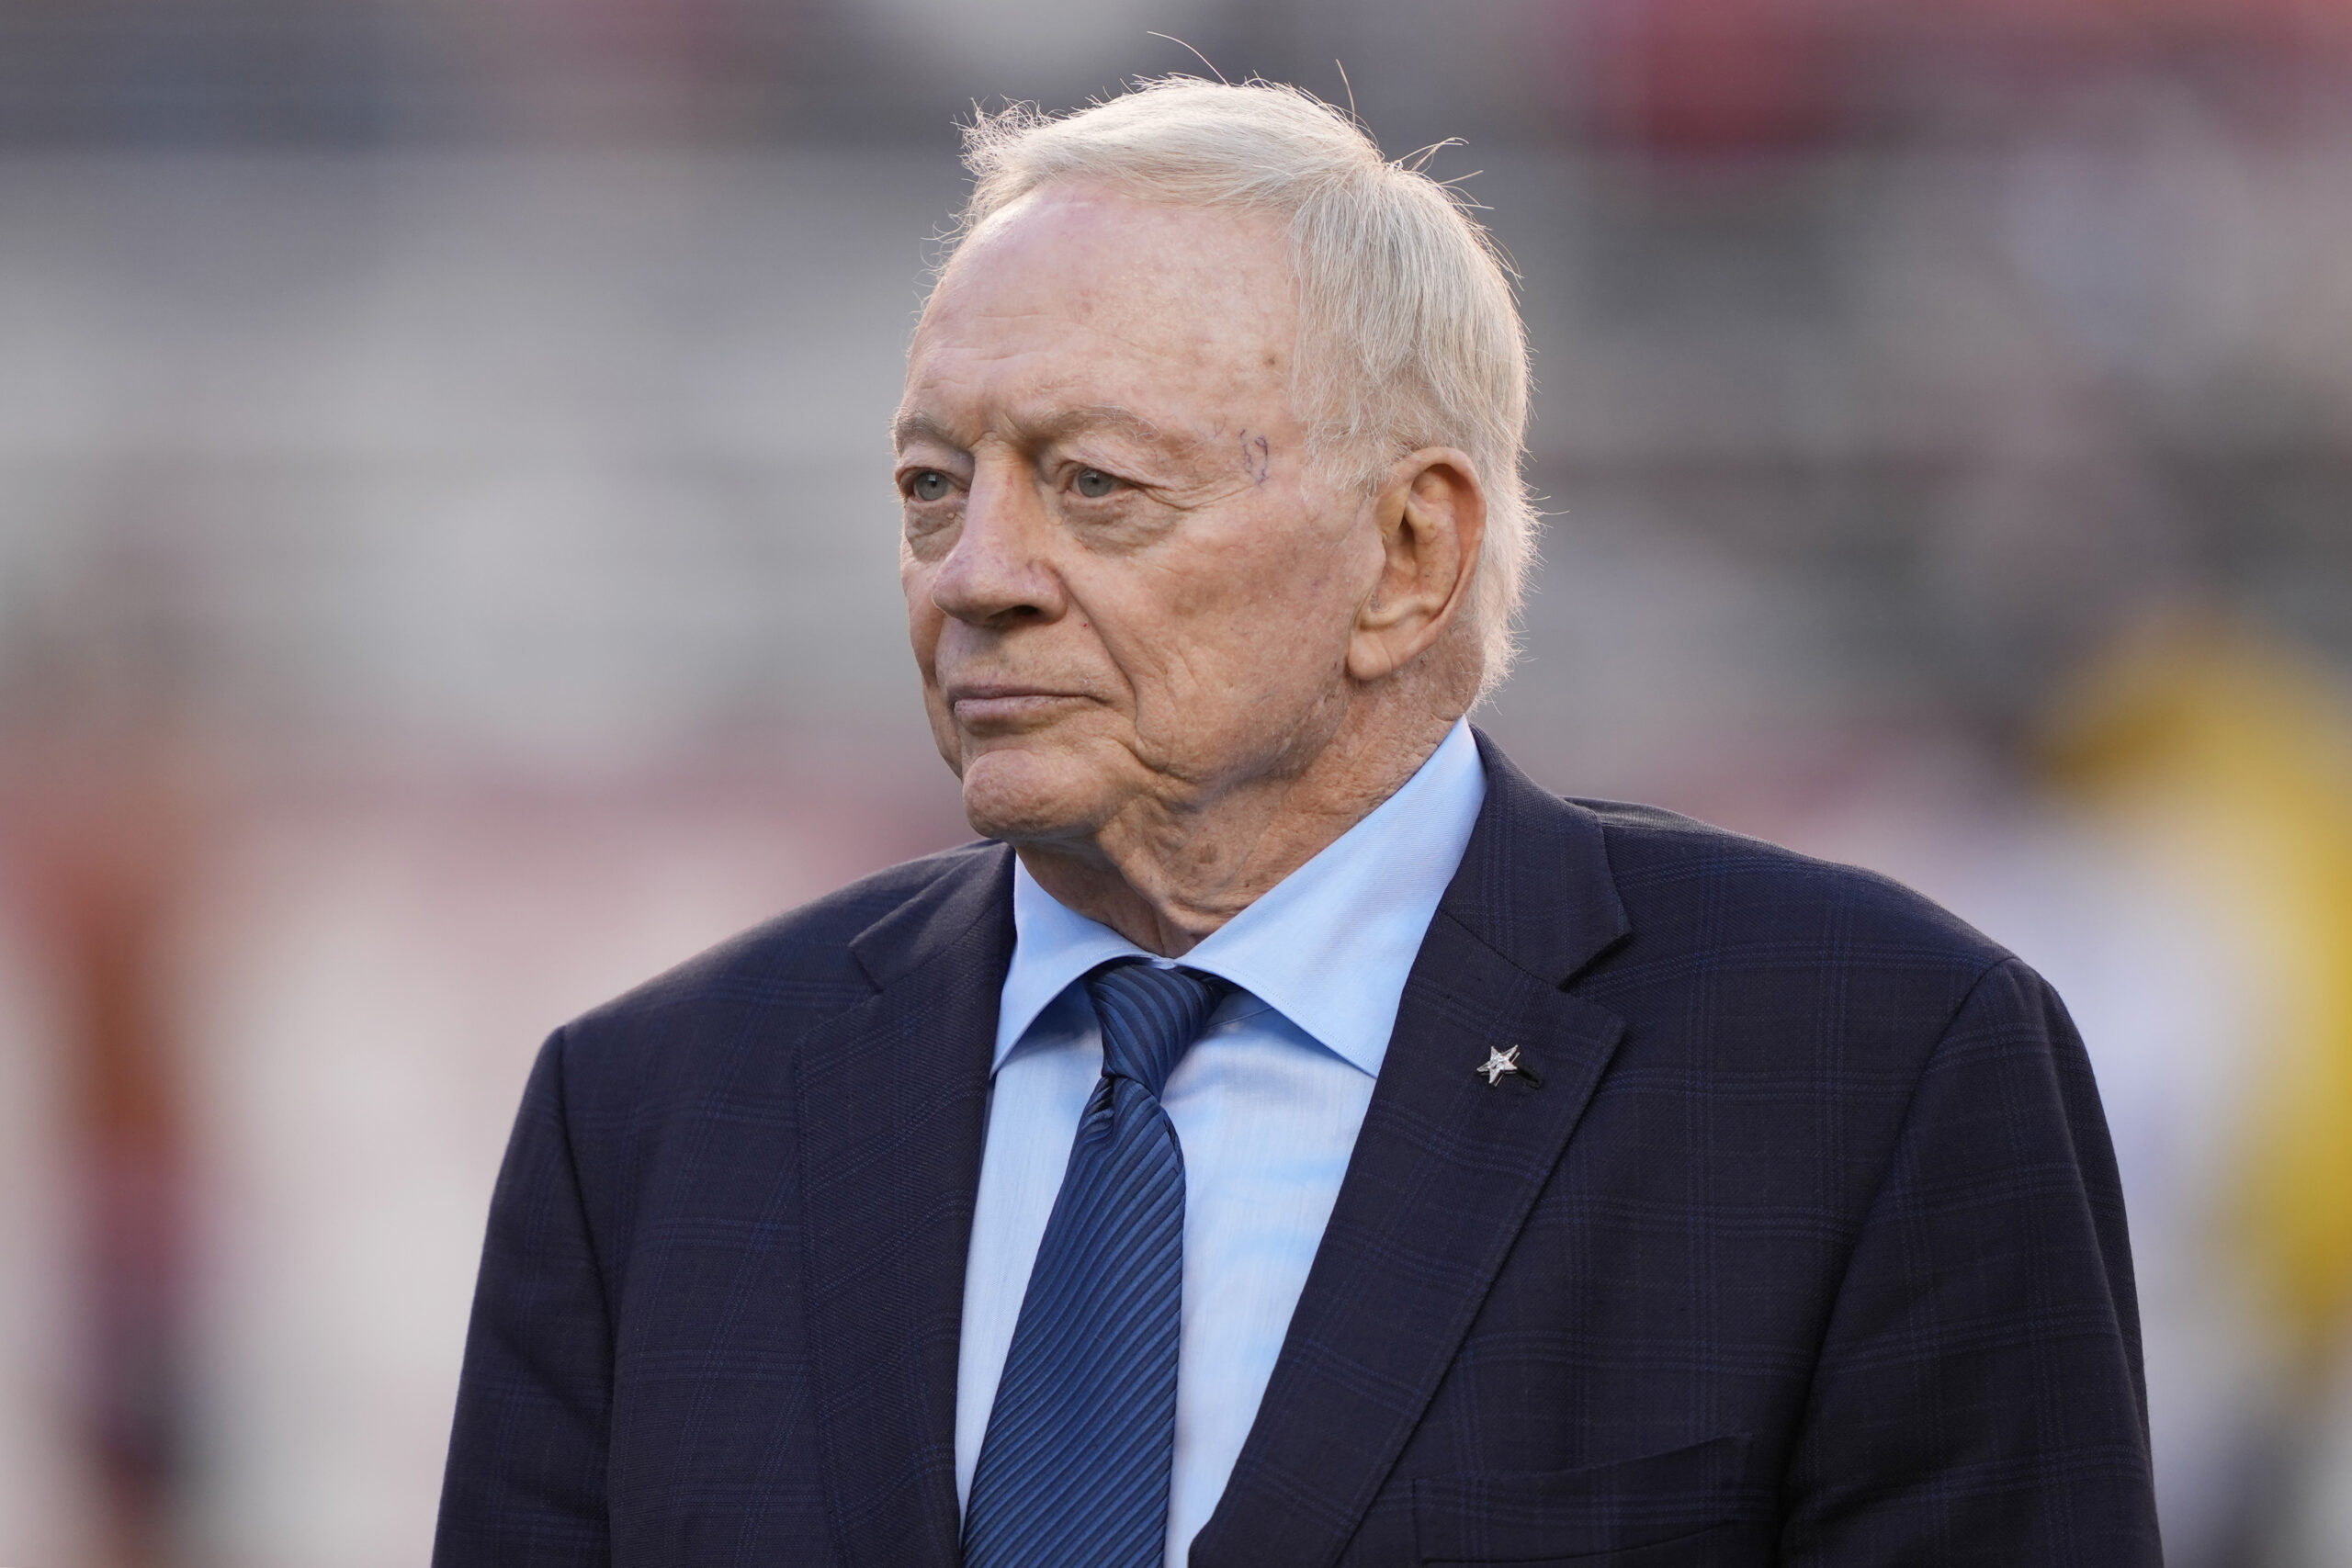 Lack of Aggression: Cowboys’ Jones says other teams will have to initiate trade talks